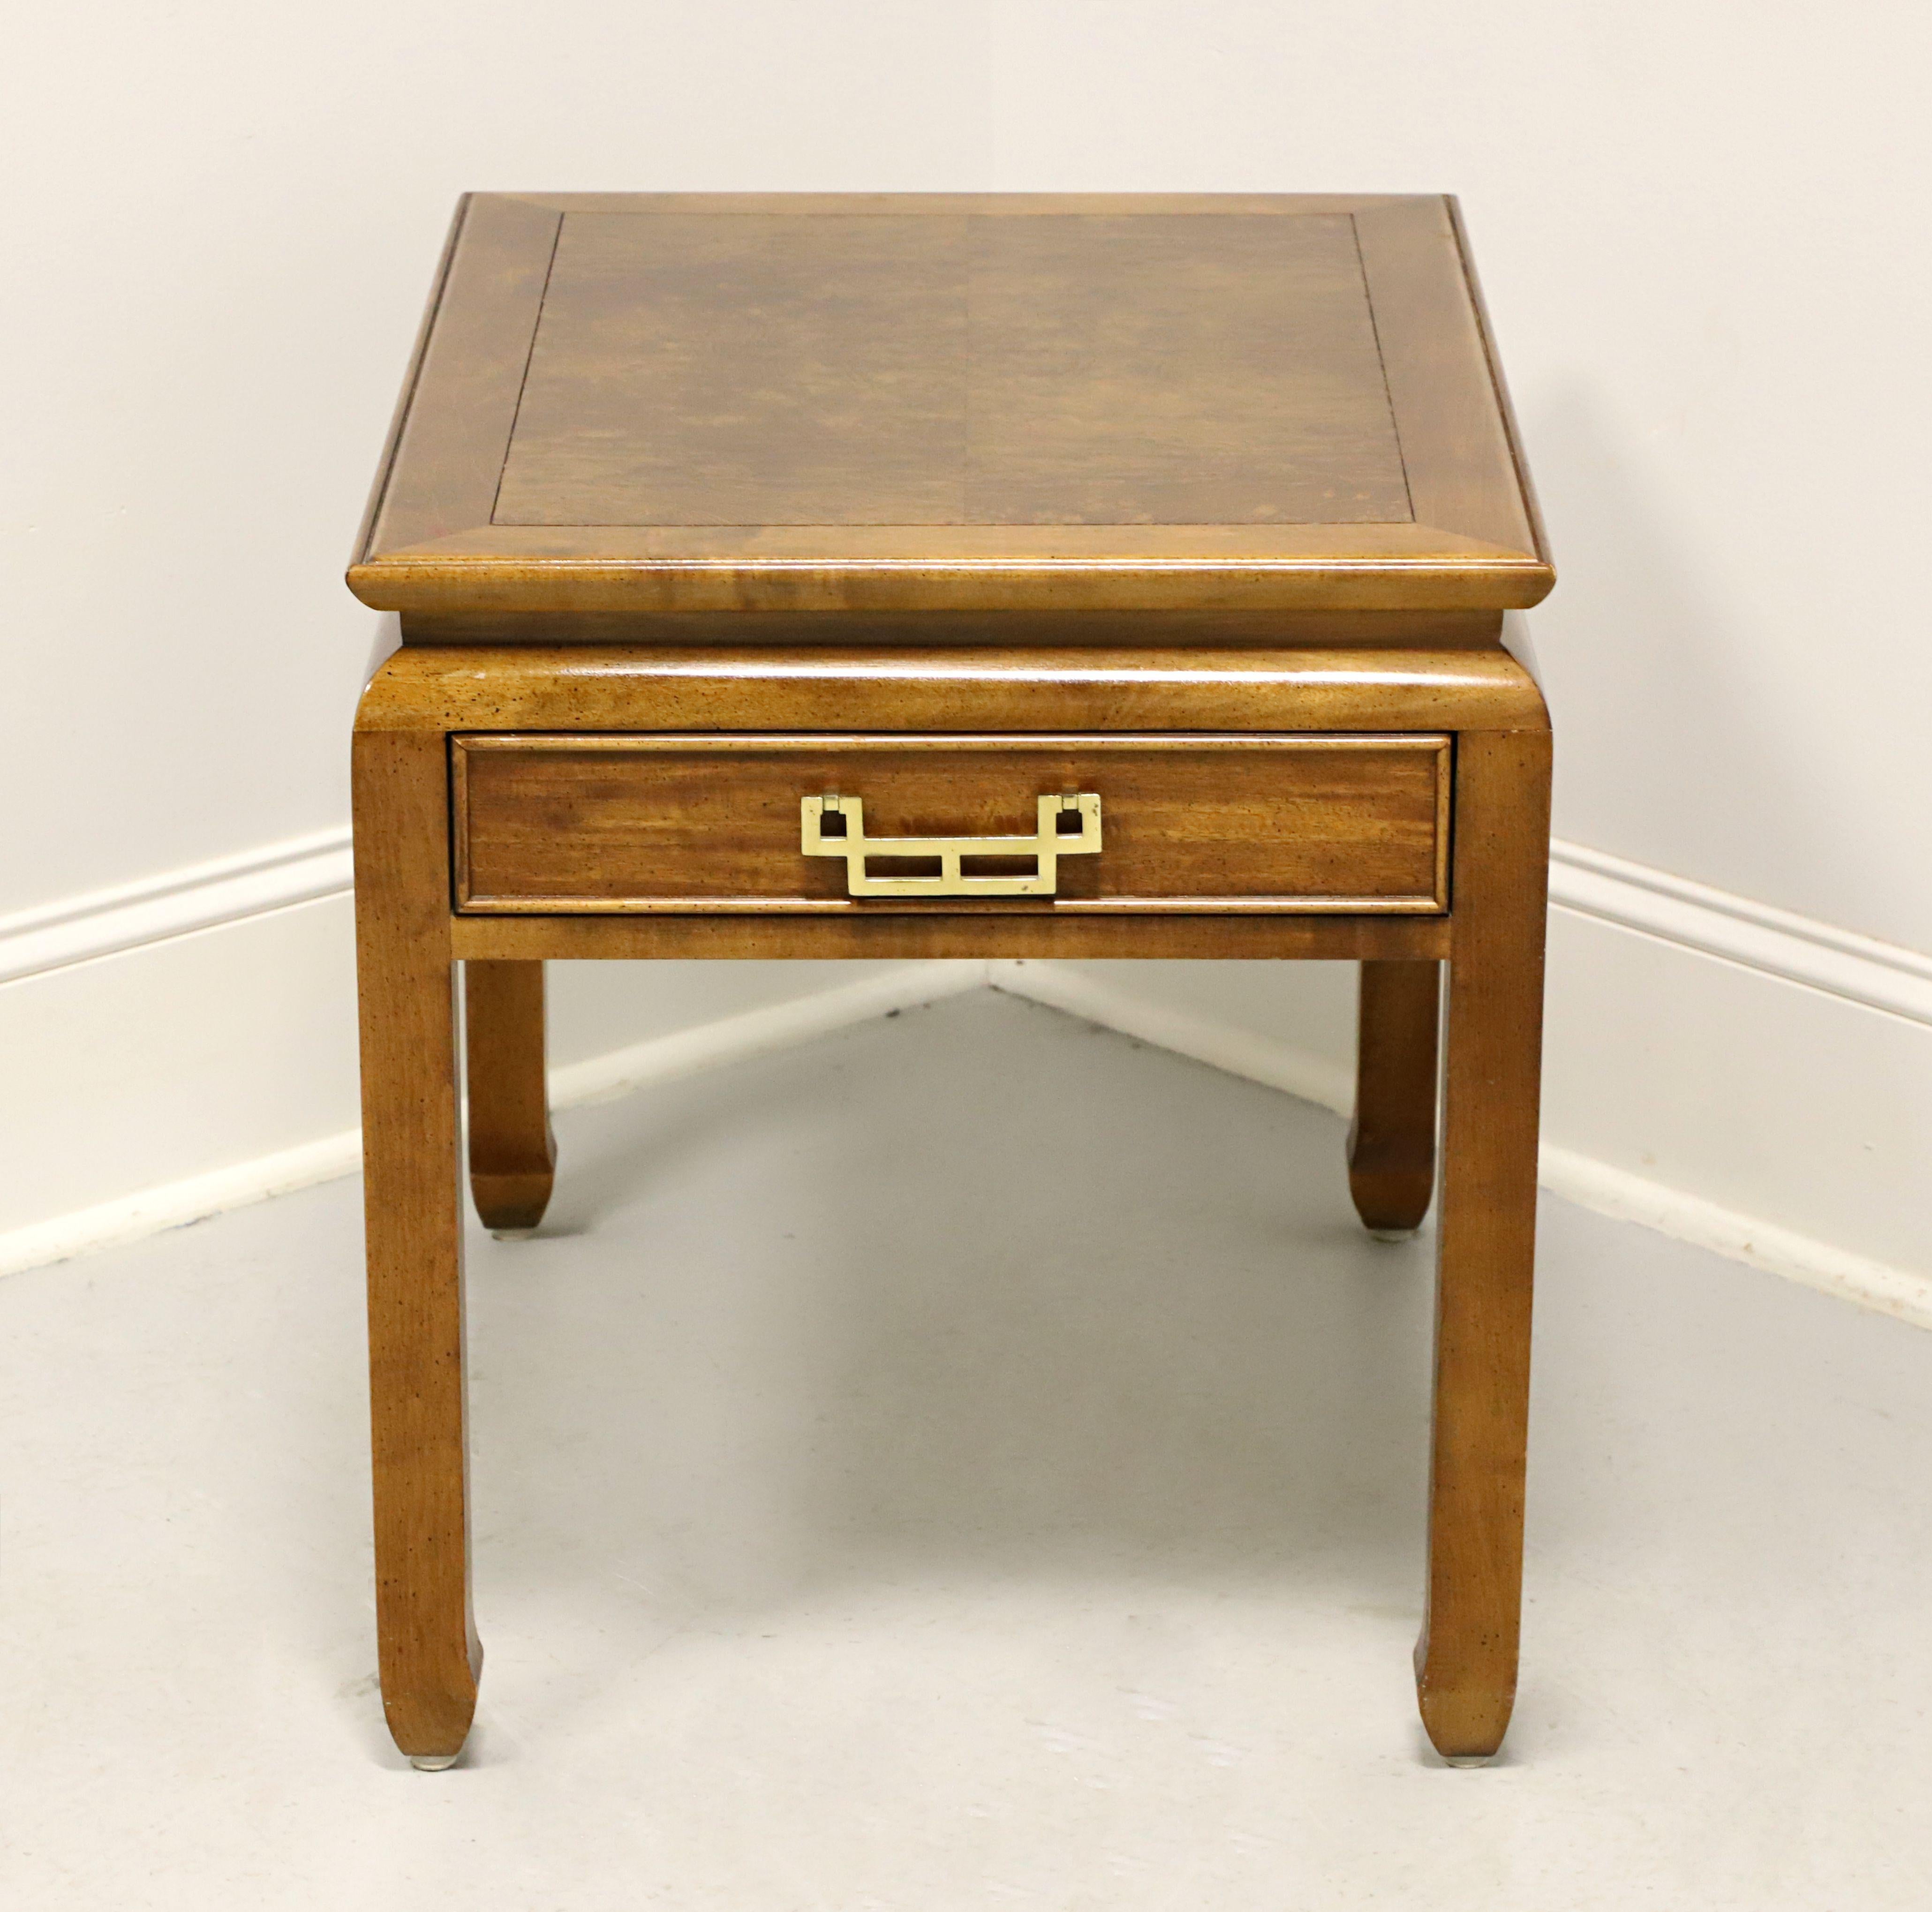 An Asian style side table by high-quality furniture maker Century, from their Chin Hua